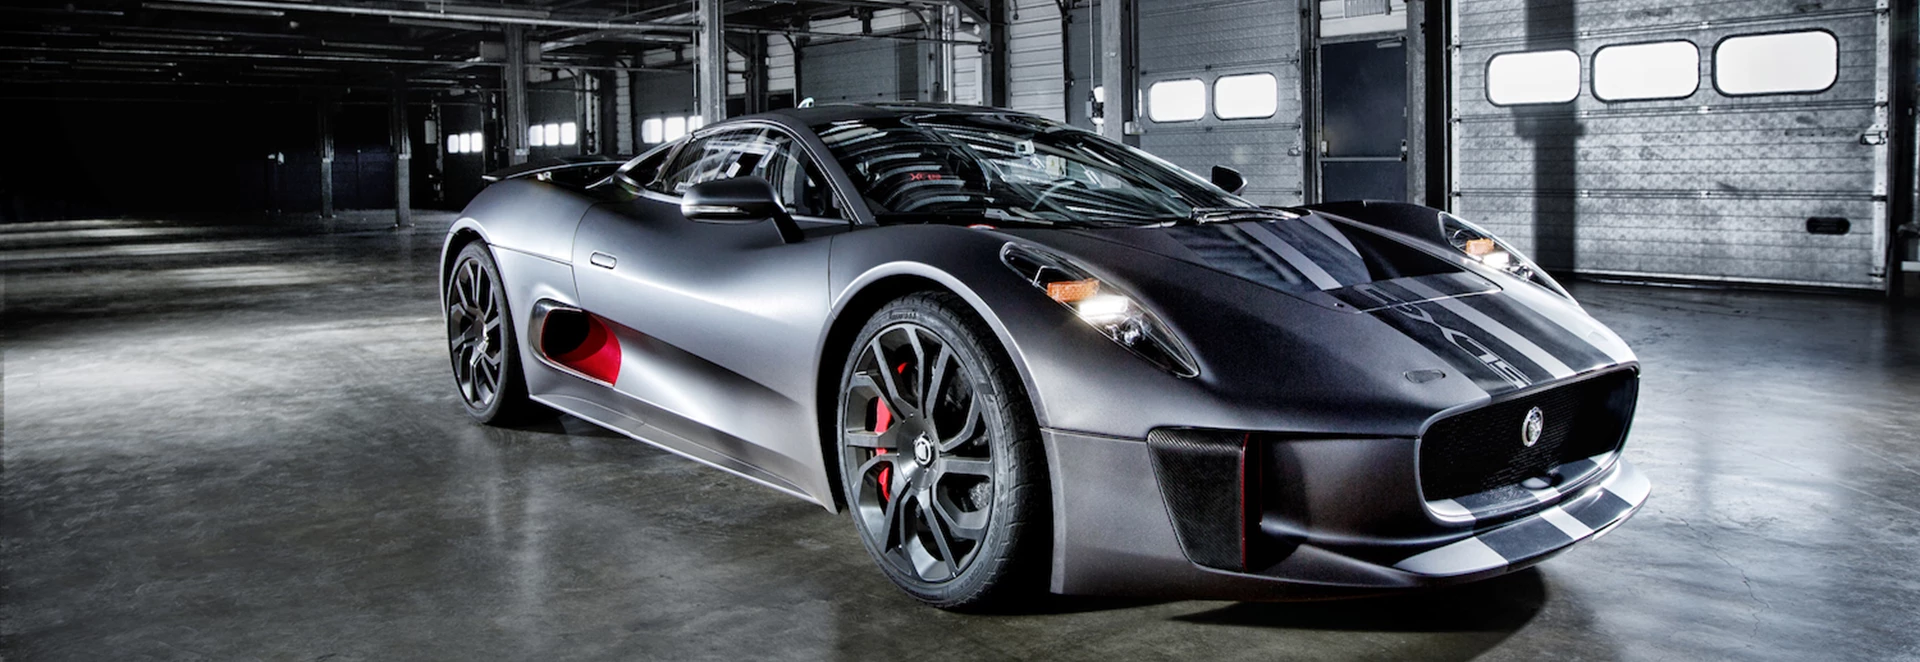 Jaguar's concept cars you never knew existed